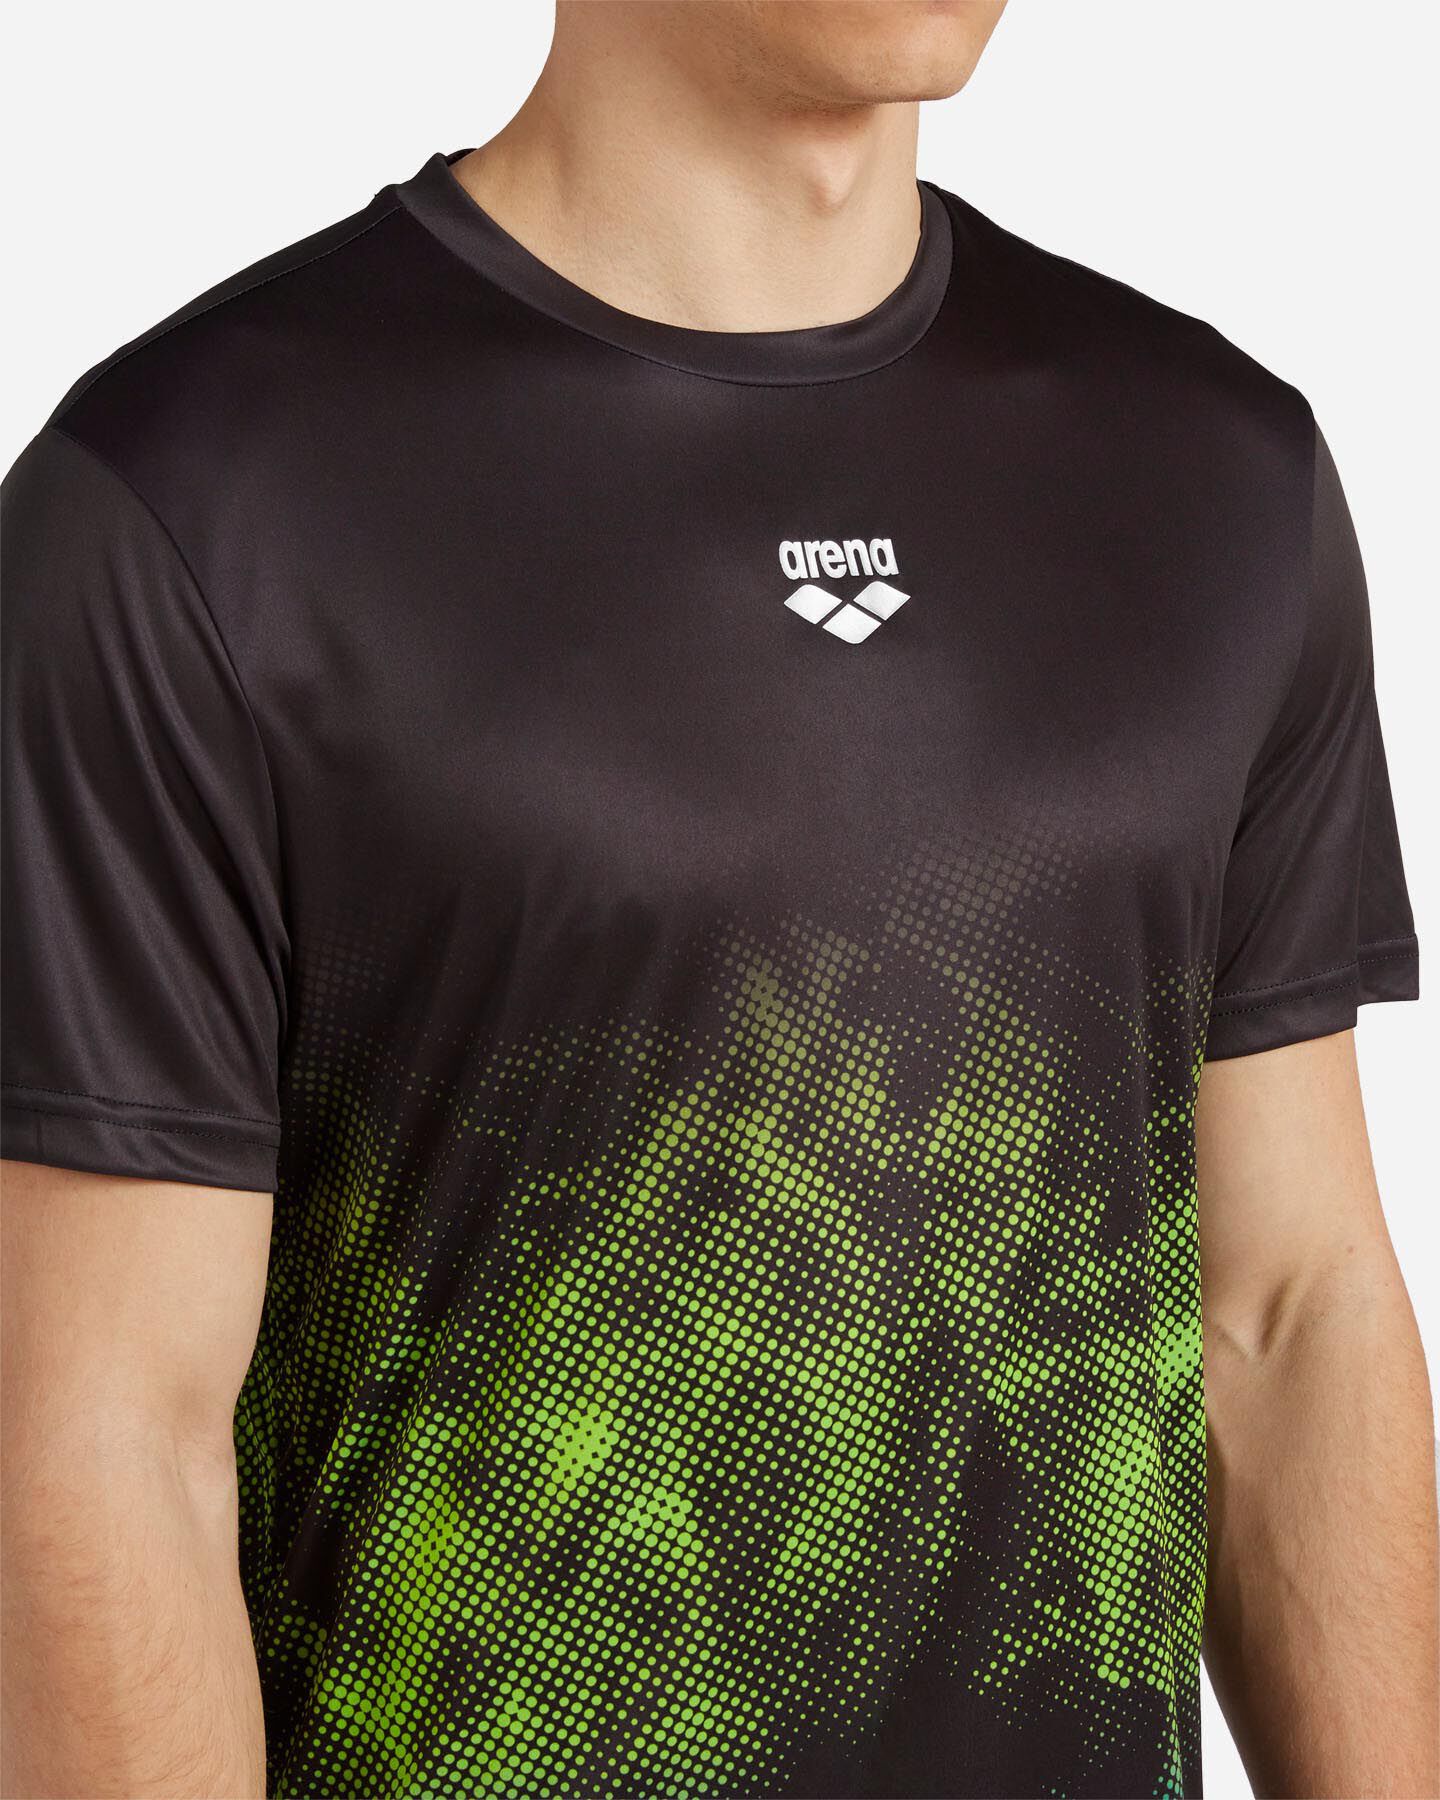  T-Shirt running ARENA AMBITION M S4131046|050|S scatto 4